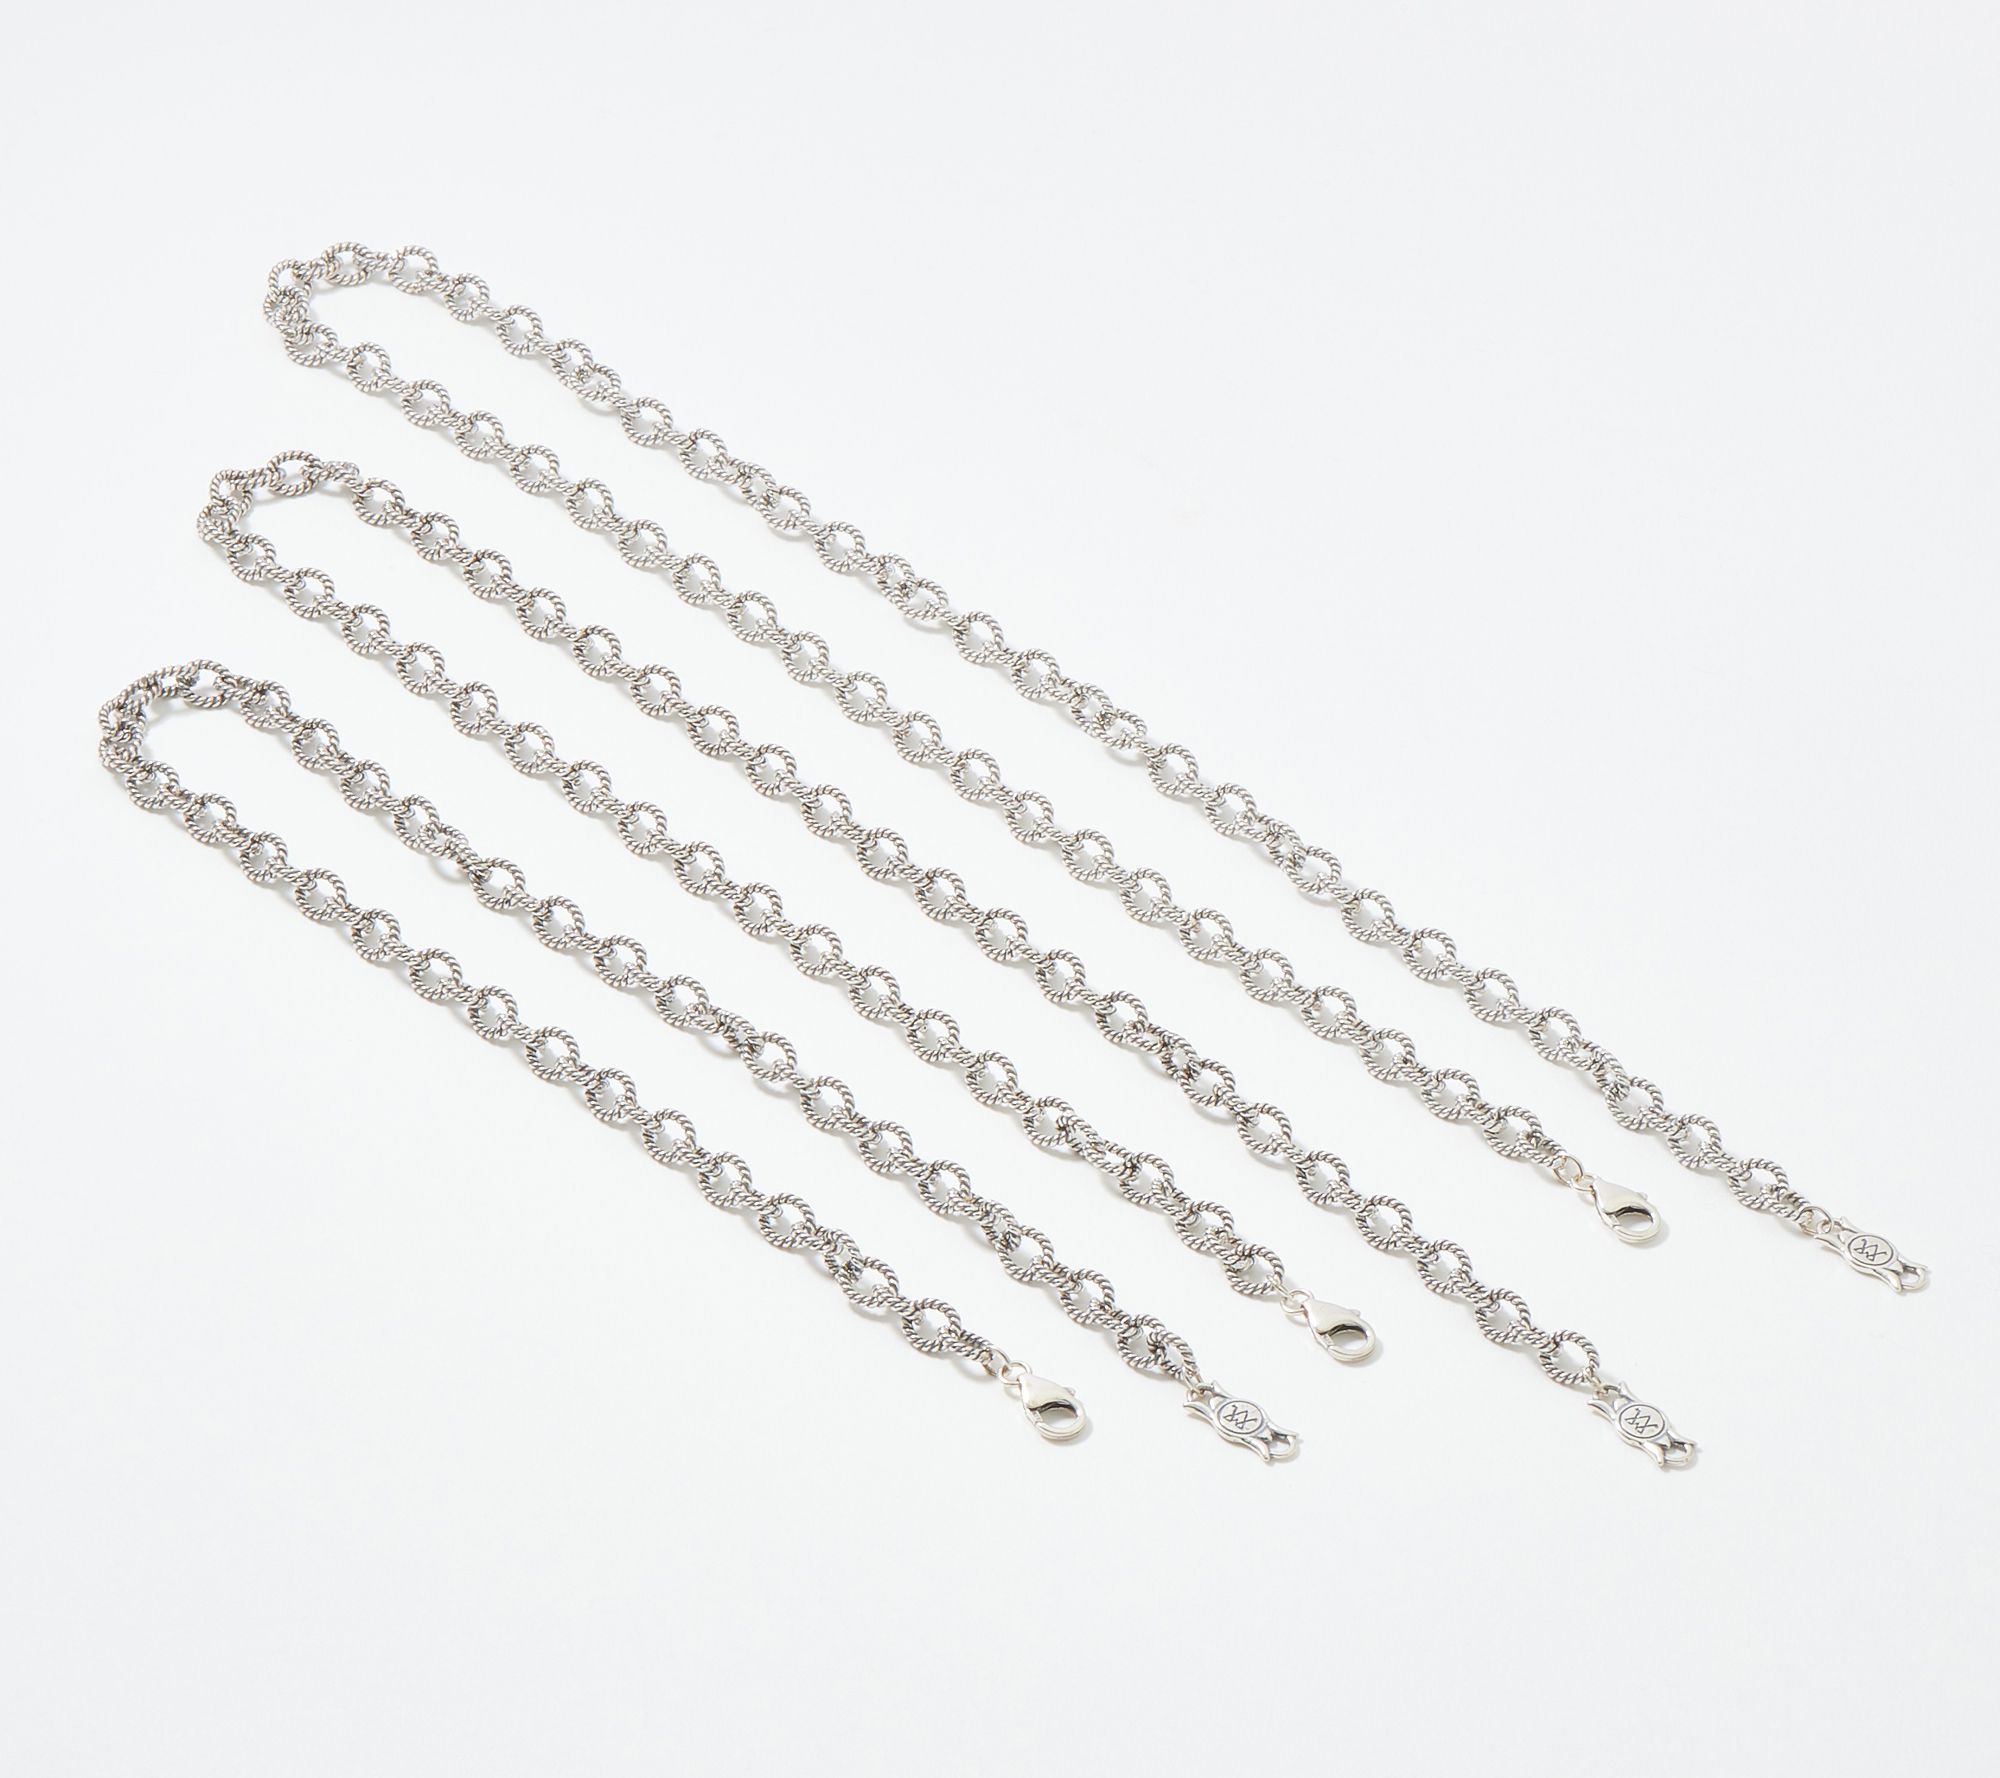 American West Sterling Silver Oval Link Chain Necklace - QVC.com